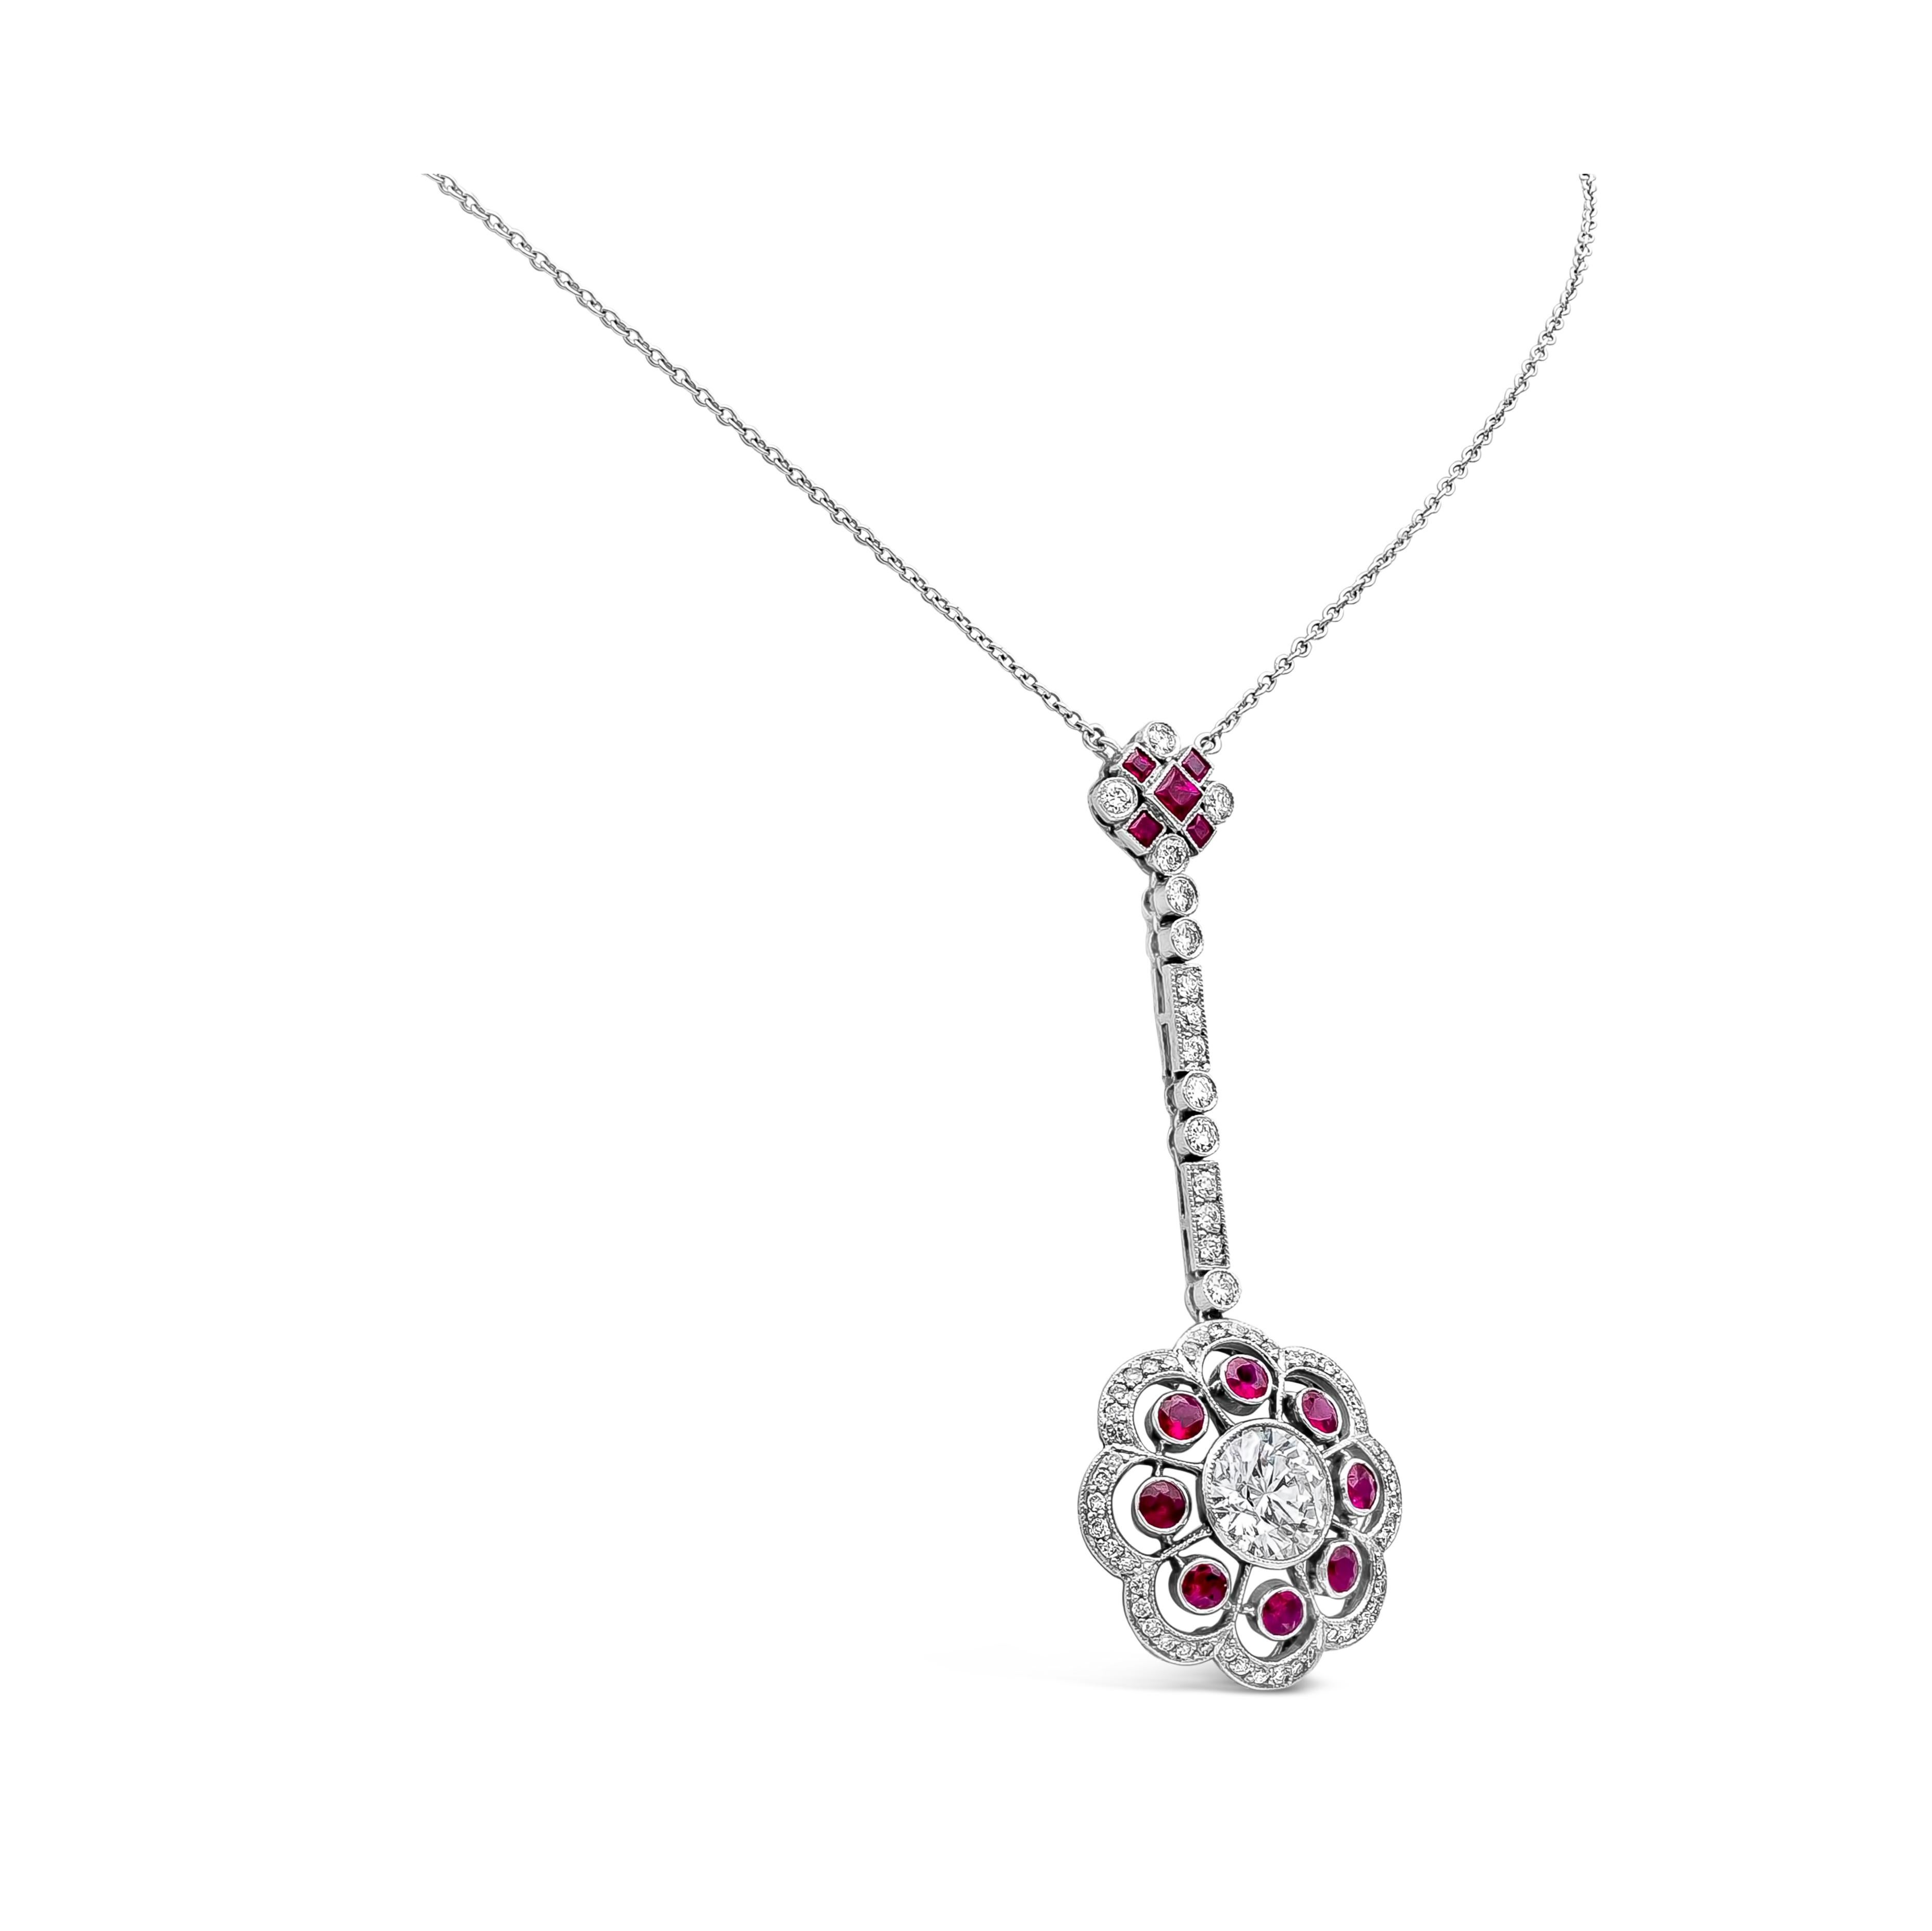 This beautiful vintage pendant drop necklace showcasing a round brilliant cut diamond center stone embellished with eight full-cut red rubies spaced evenly all around. Finished the floral-motif design with a diamond set in the outer layer. Spaced by